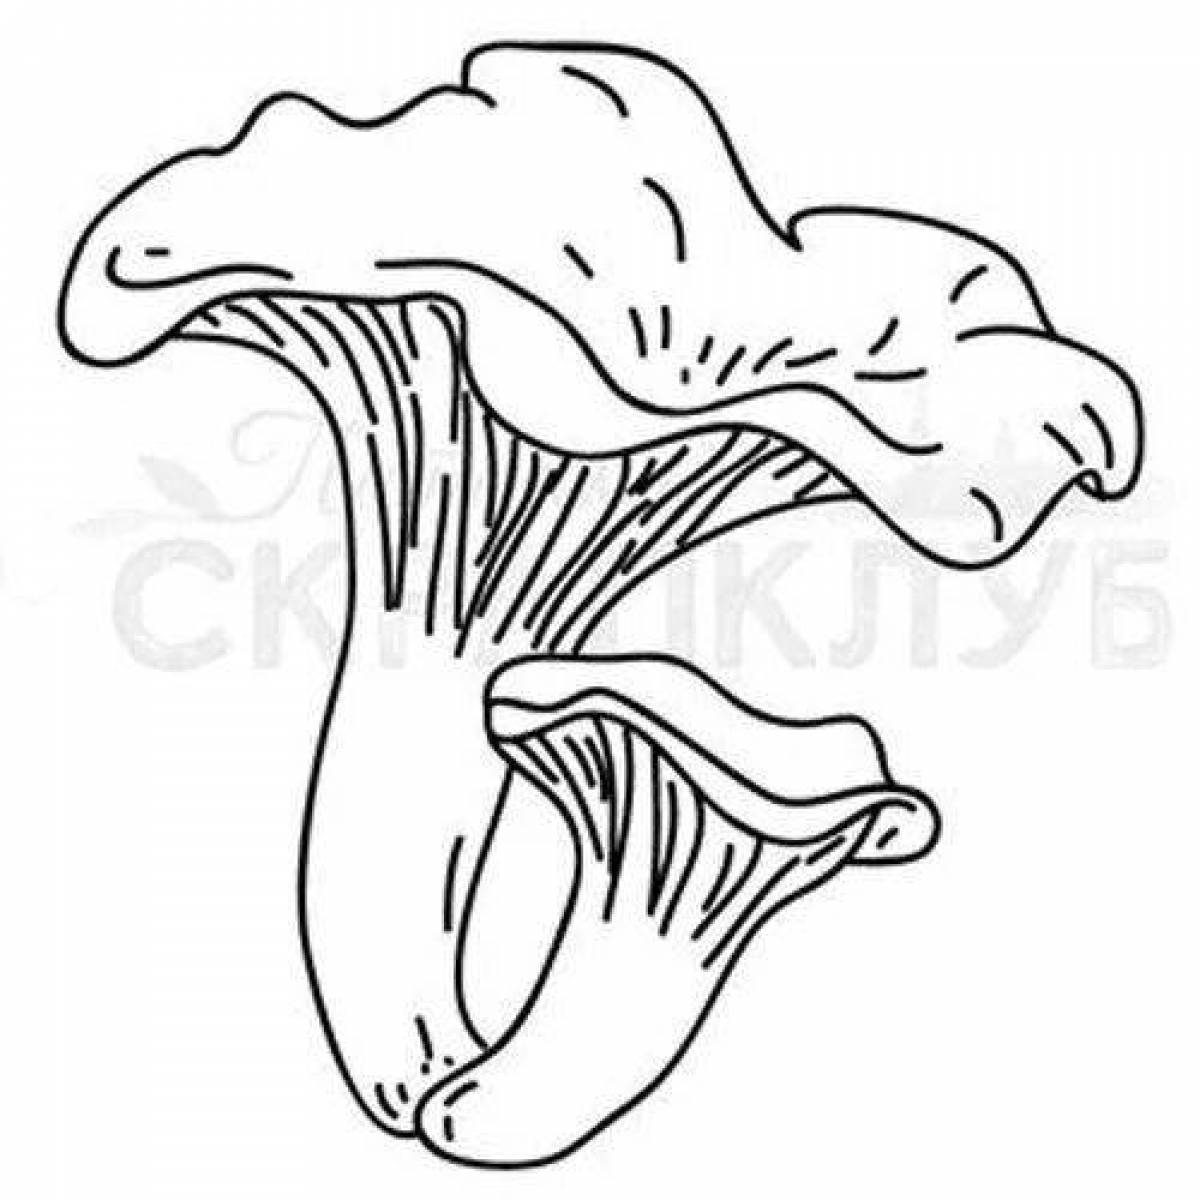 Colorful chanterelle mushroom coloring page